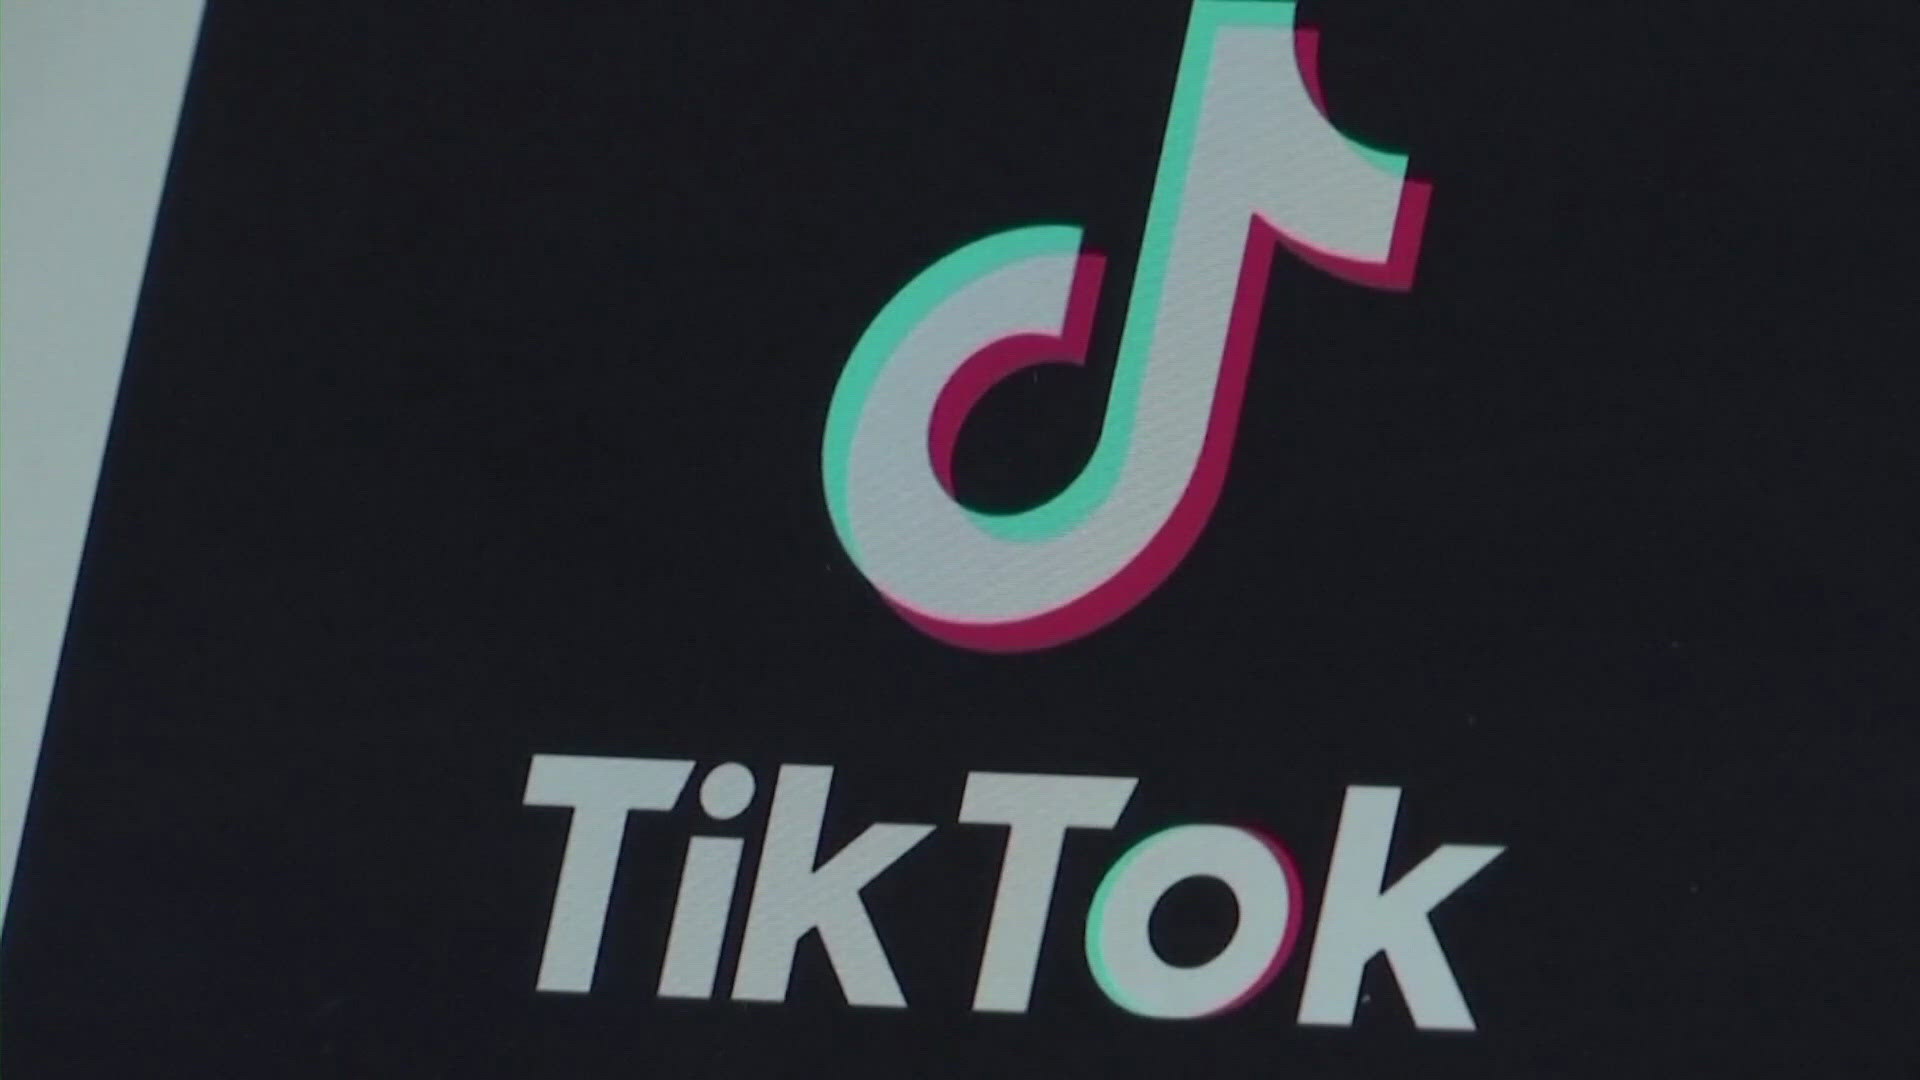 President Joe Biden signed a bill that would give $95 billion in war aid to allies. But a provision that could ban TikTok was included in that bill.